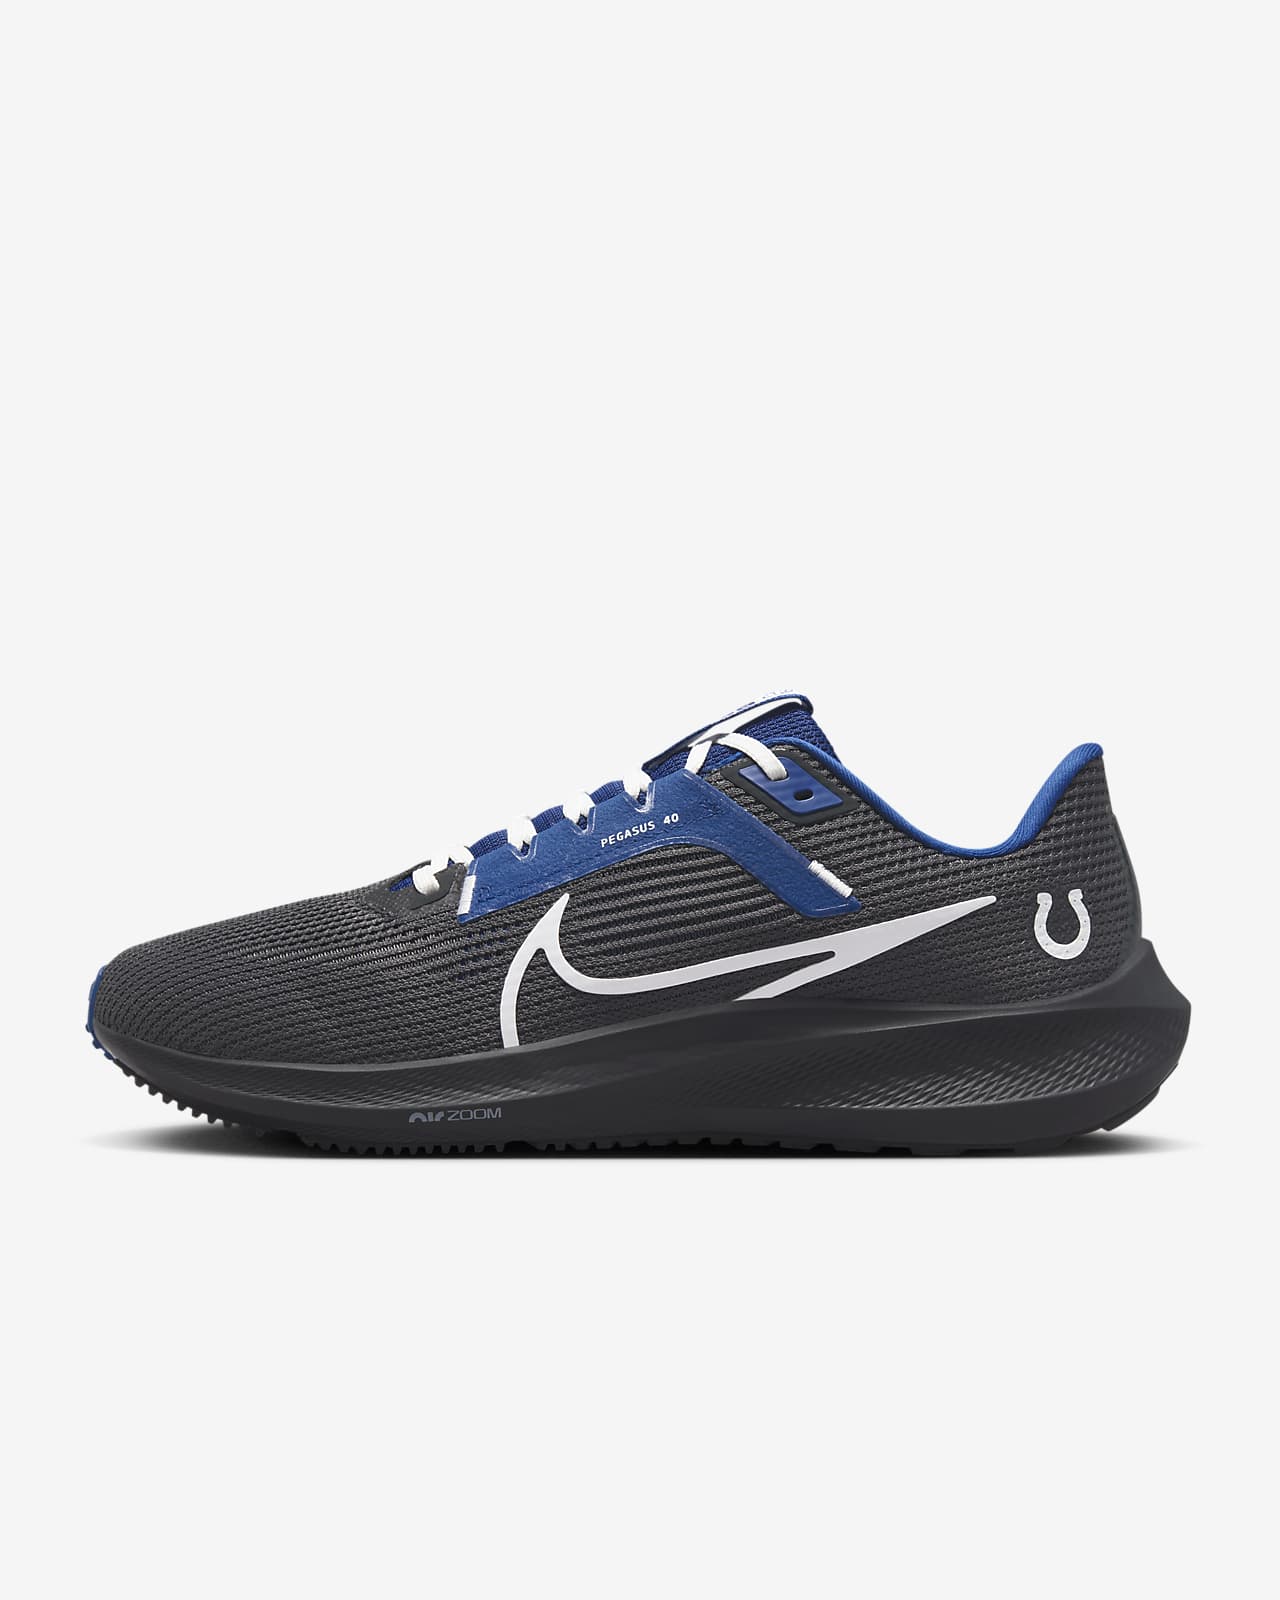 Nike Pegasus 40 (NFL Indianapolis Colts) Men's Road Running Shoes